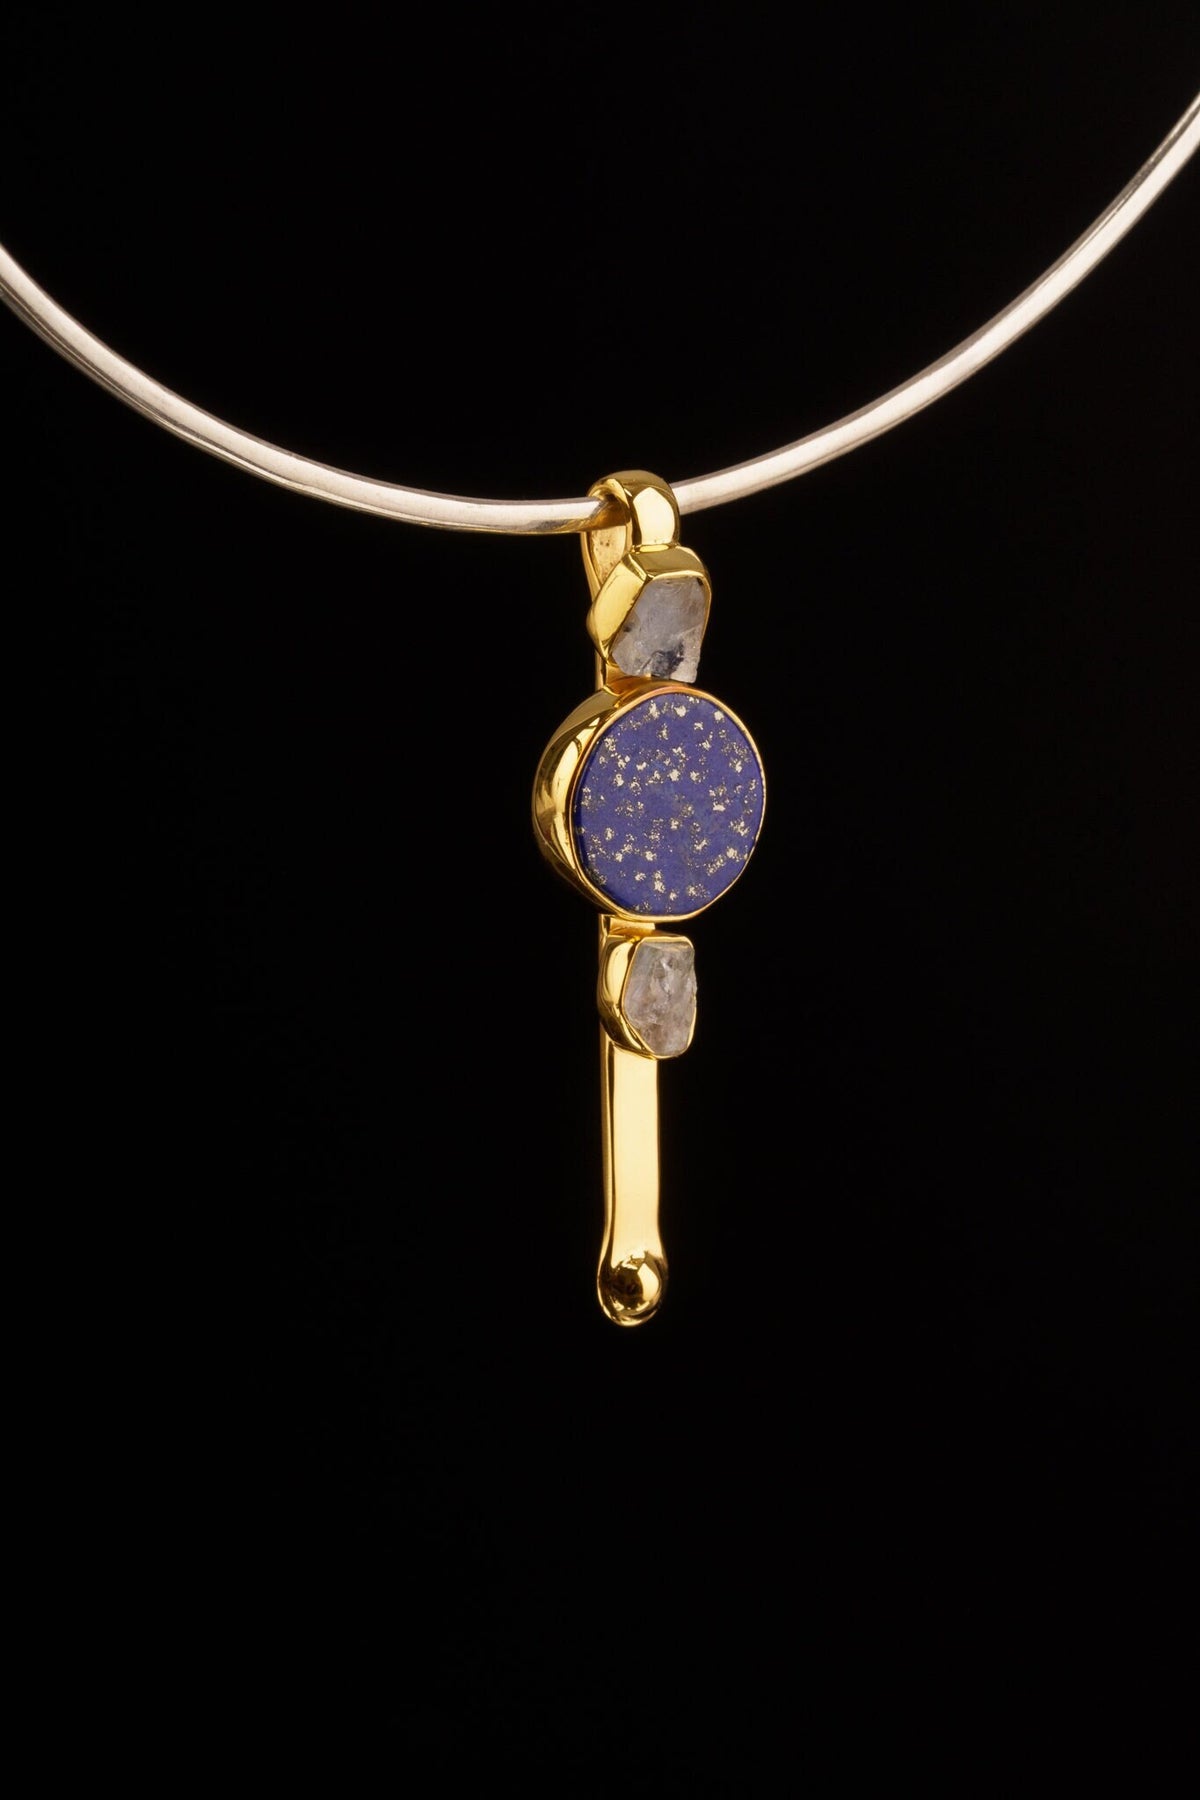 Gem Moonstone & Lapis Lazuli - Inverted Indian Ceremonial Spoon / Scoop Necklace - 16K Gold plated Cast Sterling Silver